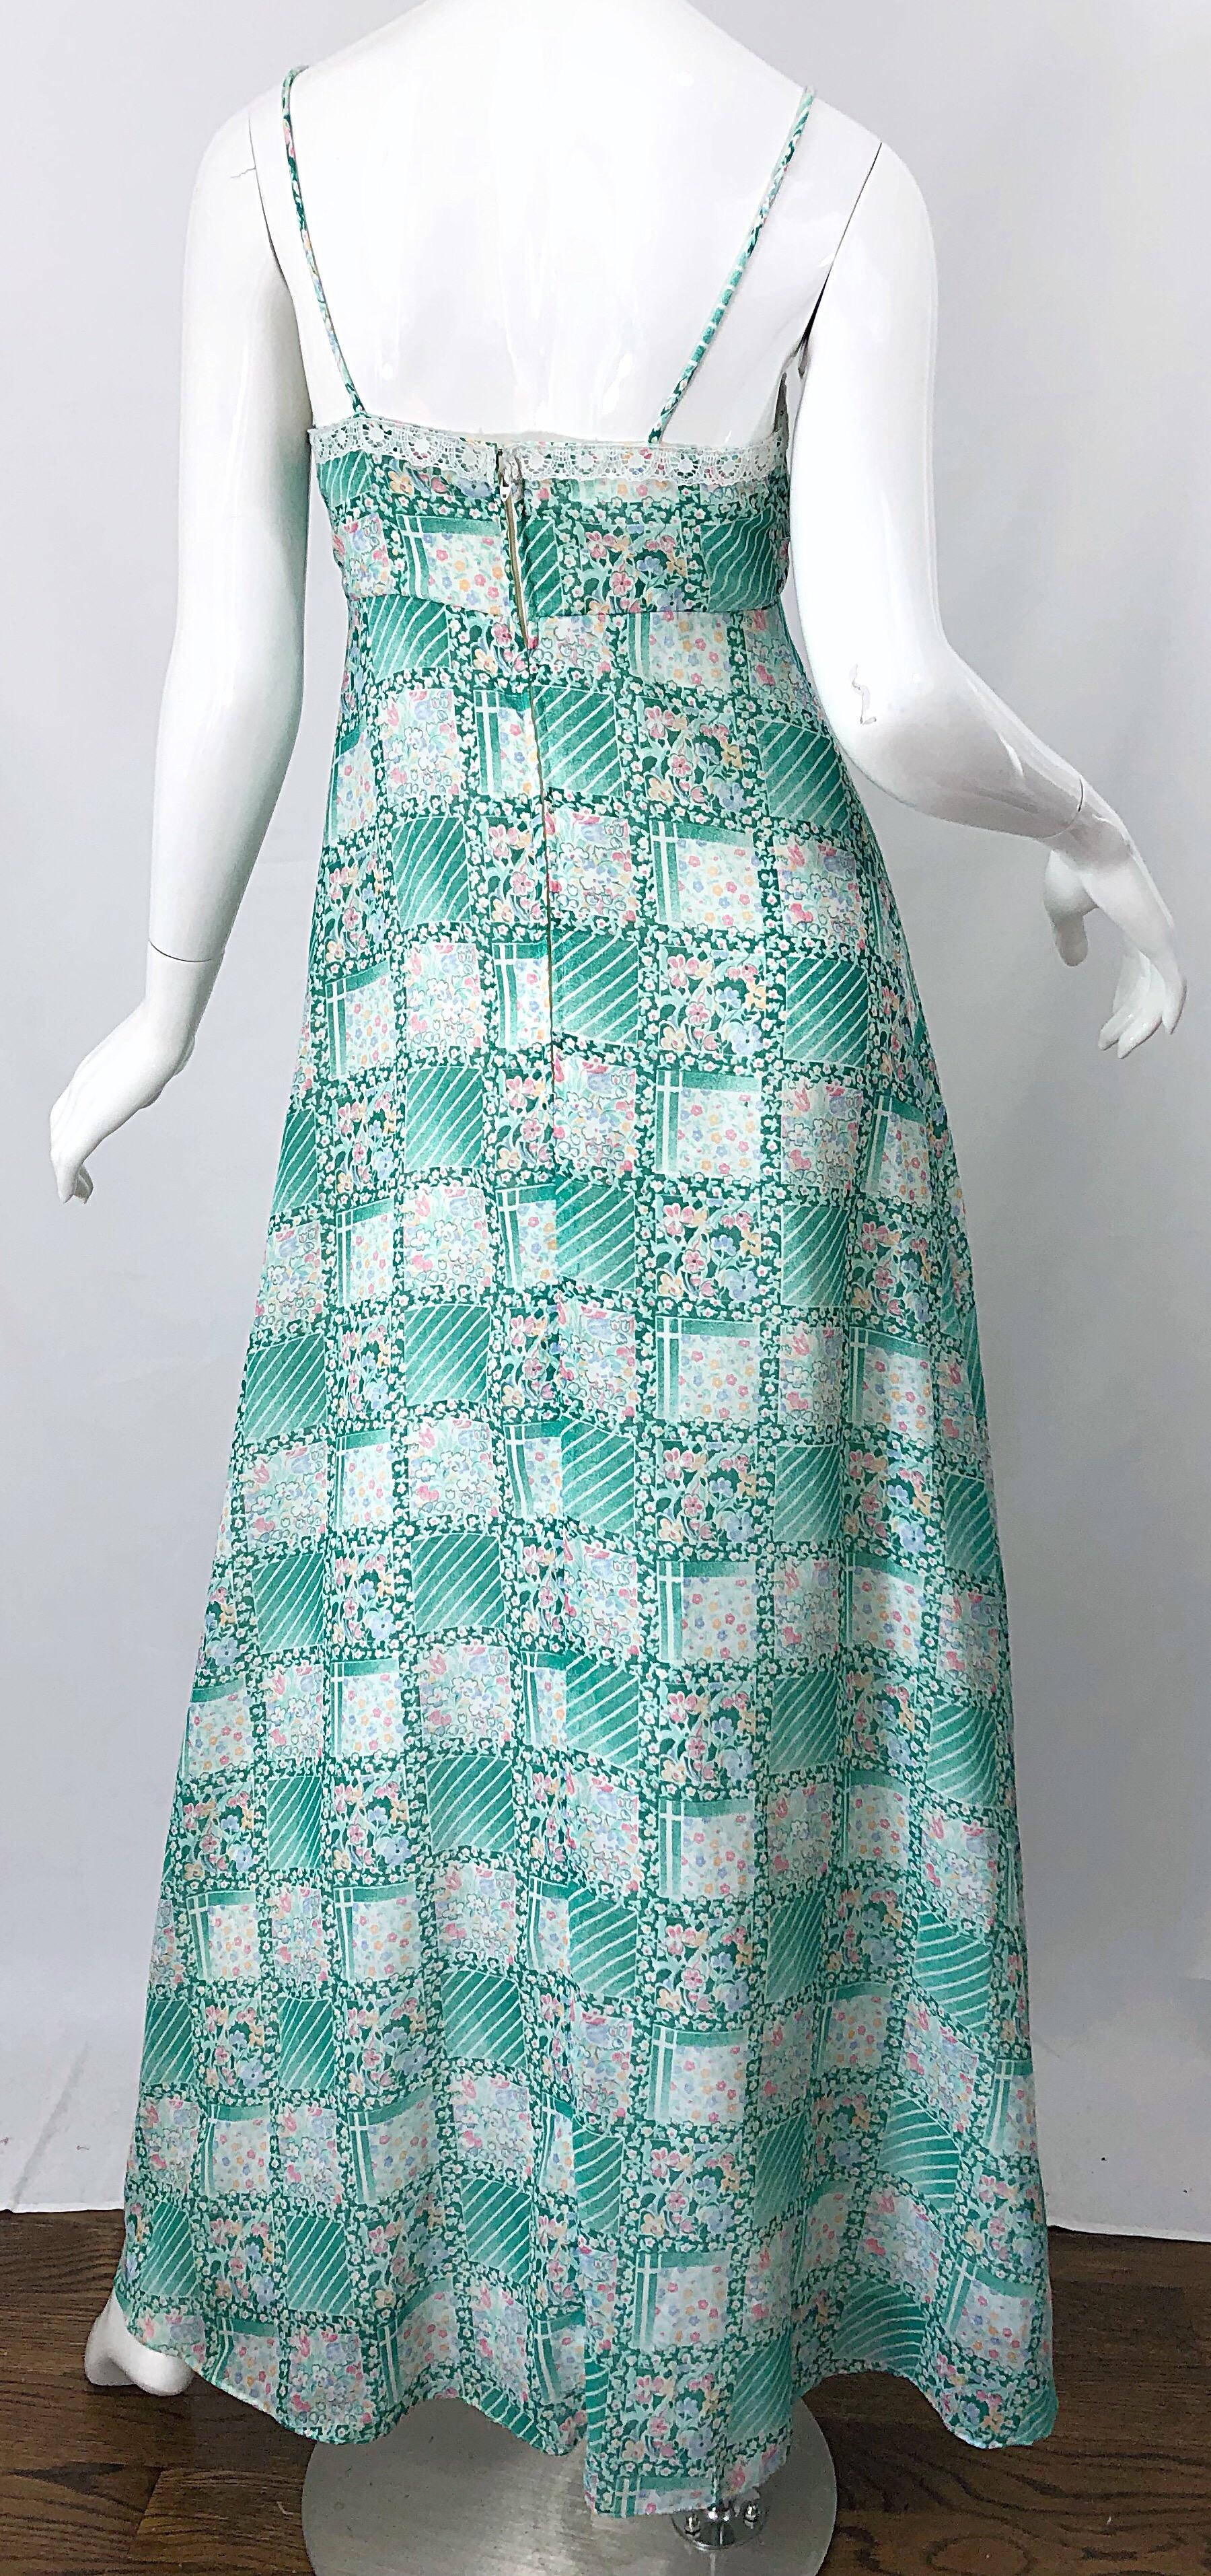 1970s Teal Green Blue Pink Flower Printed Cotton + Lace Vintage 70s Maxi Dress For Sale 3